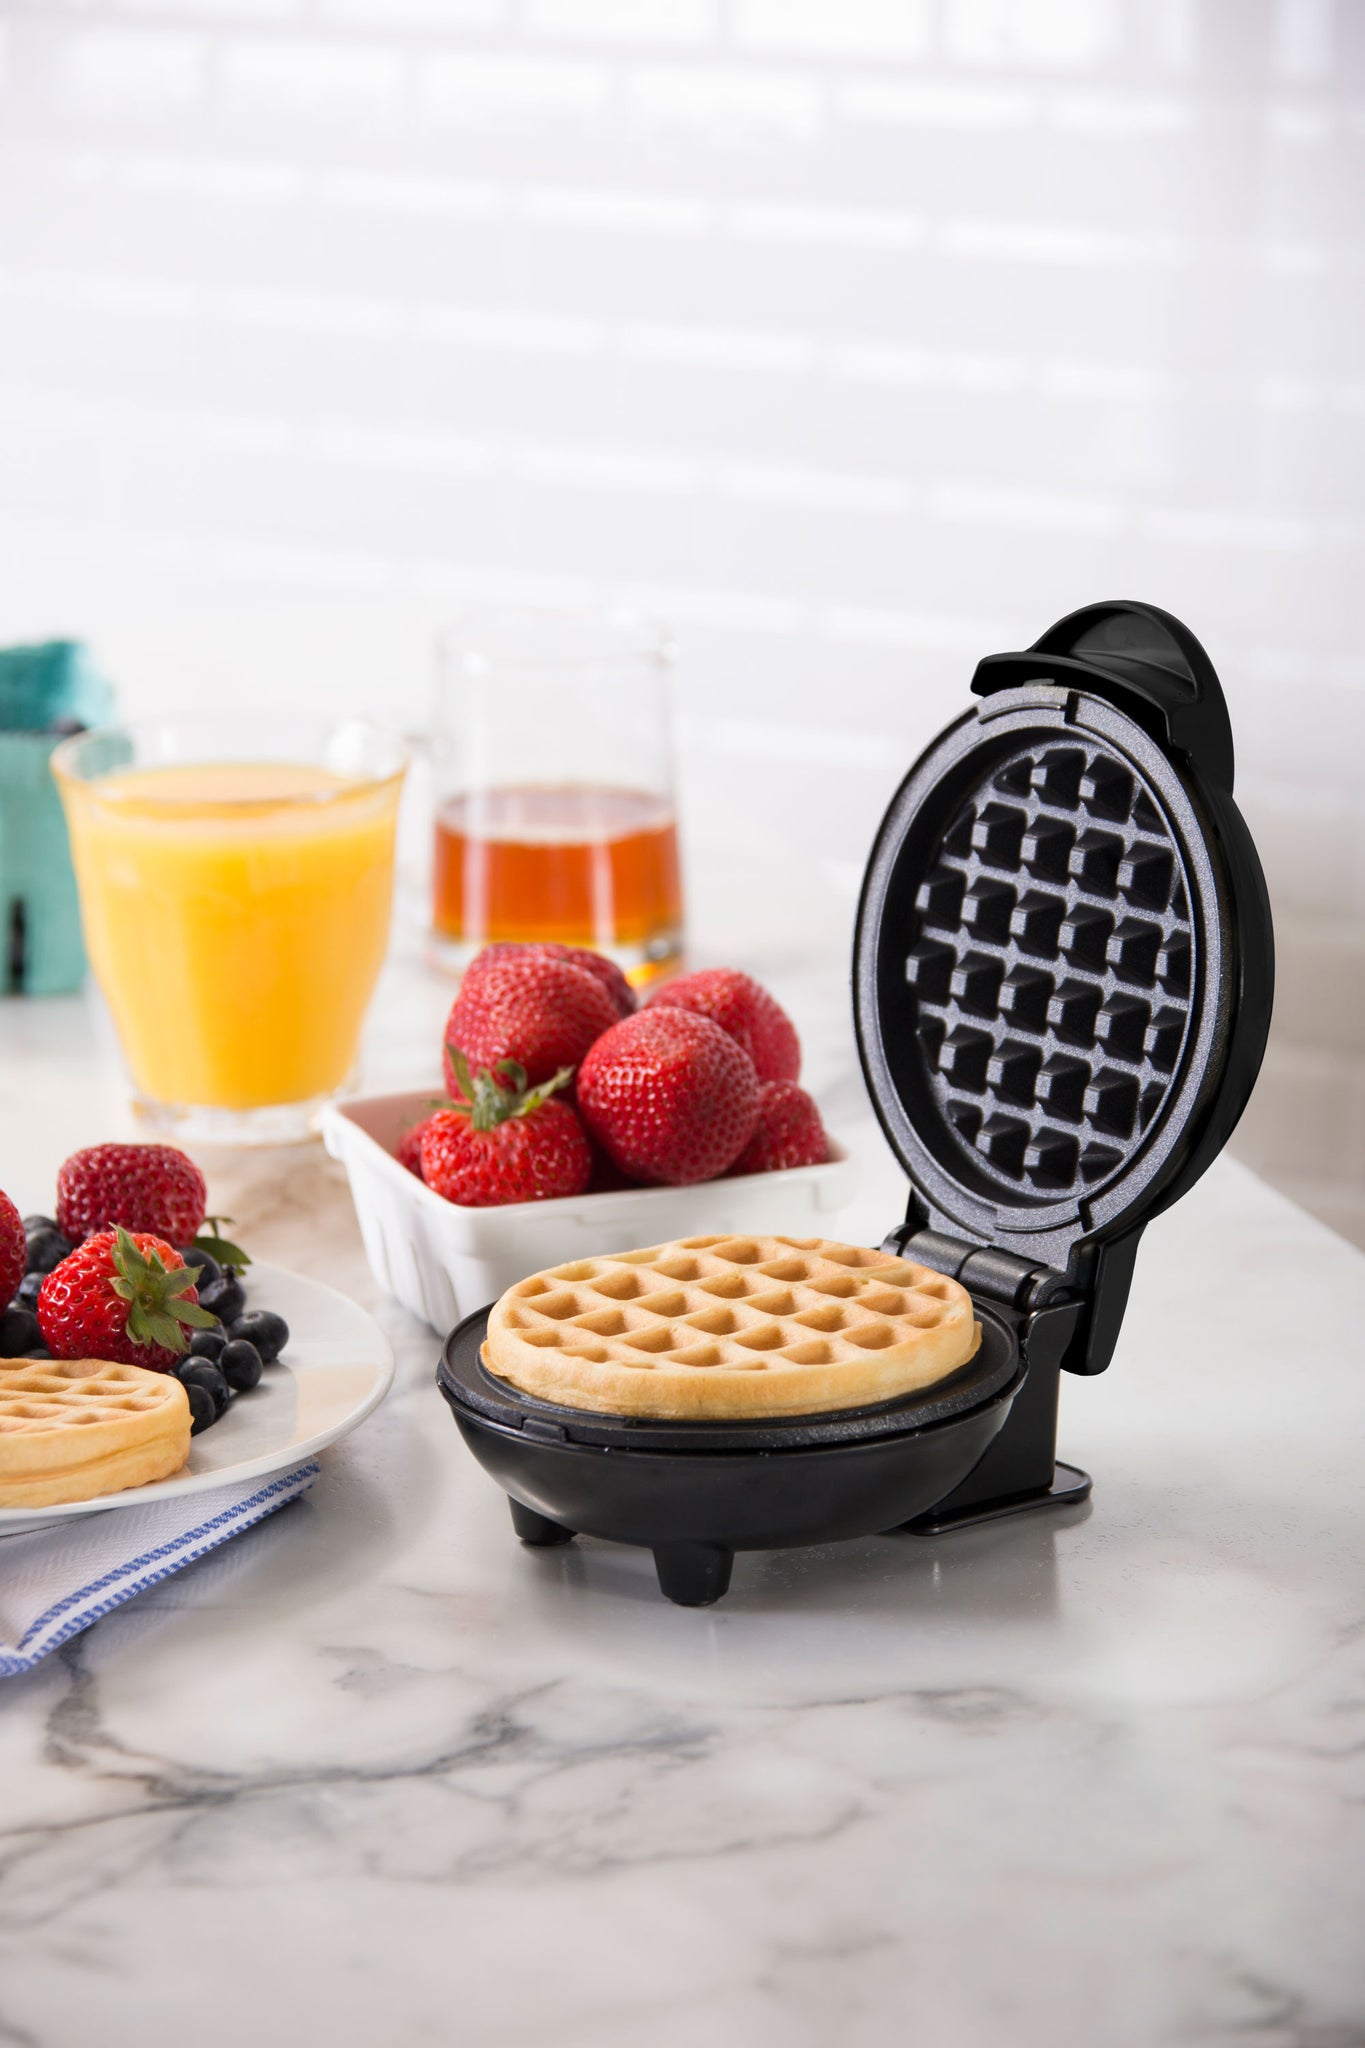 mini double waffle maker 4 non-stick surfaces families, kids, and  individuals